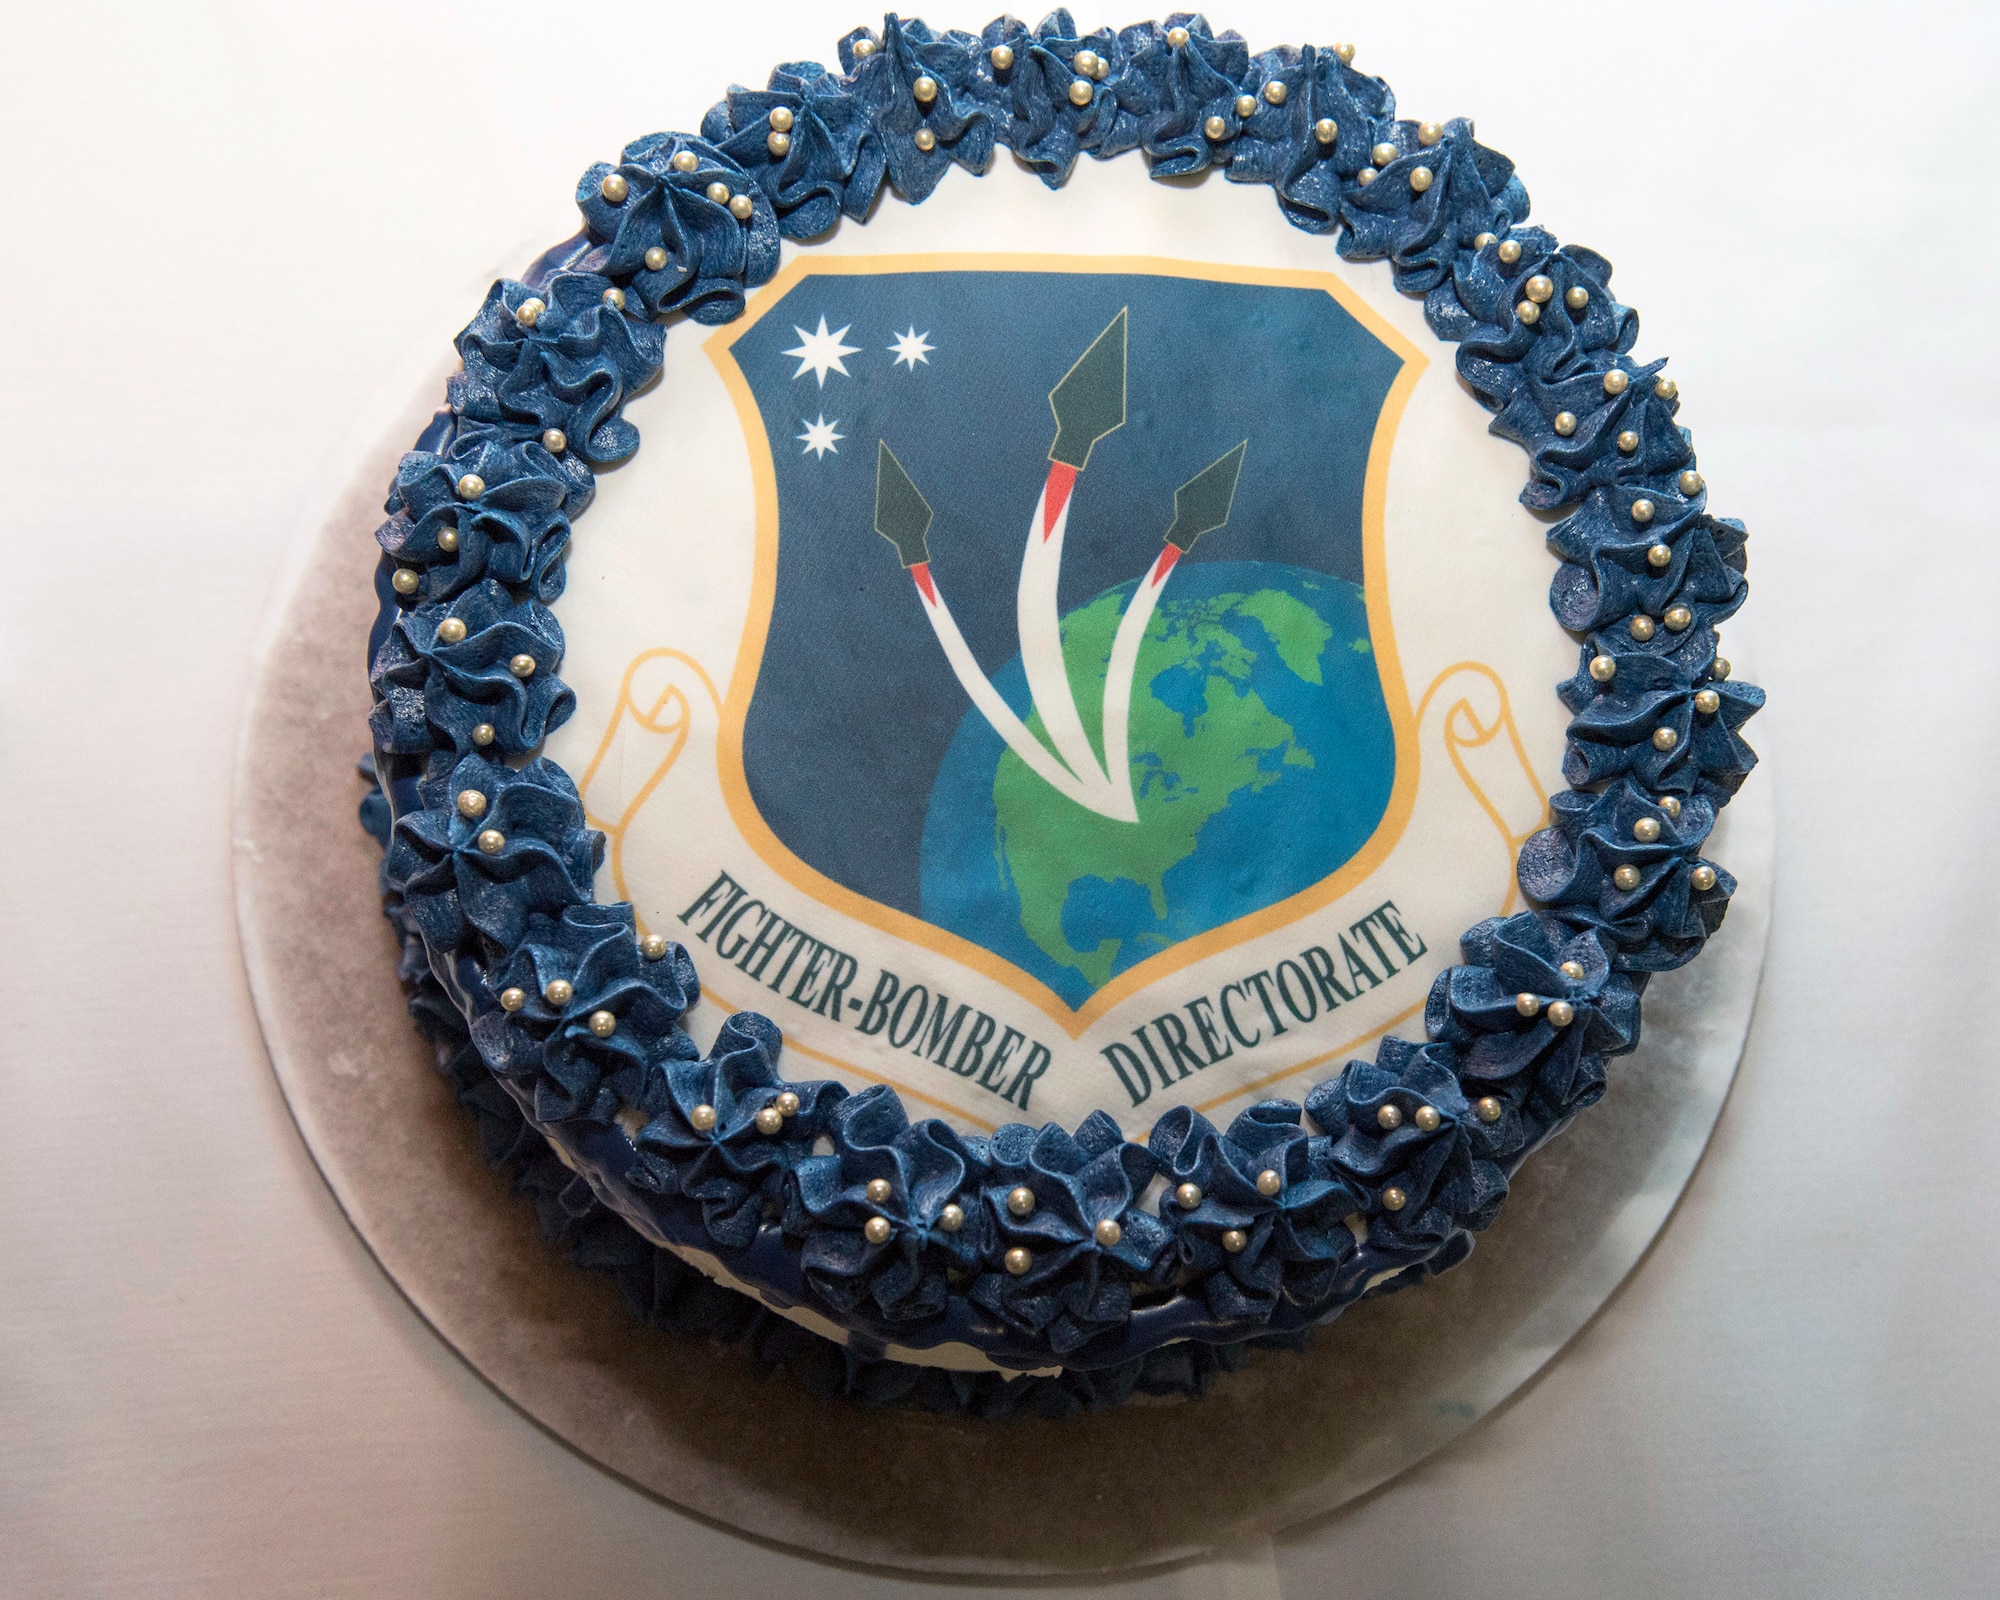 Brig. Gen. Heath Collins assumed leadership as PEO for Fighters Bombers during a March 28 ceremony. Following the ceremony, refreshments were available for attendees including a cake with the Fighter Bomber logo. (U.S. Air Force photo / Michelle Gigante)